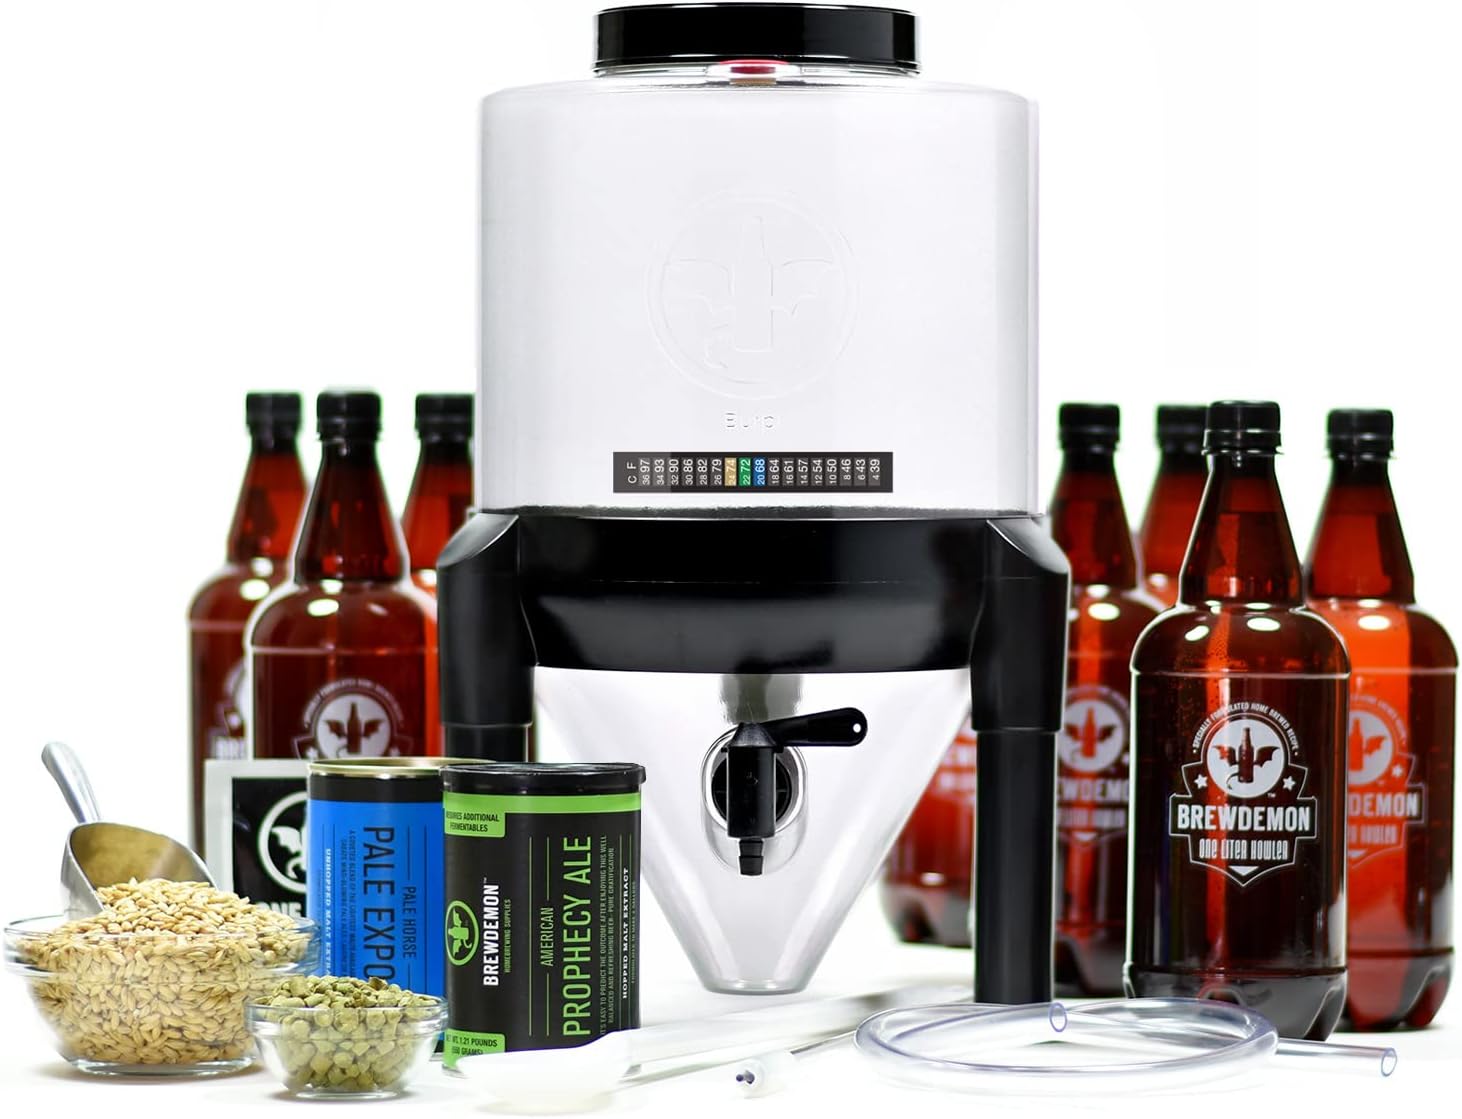 BrewDemon Craft Beer Brewing Kit Extra Review